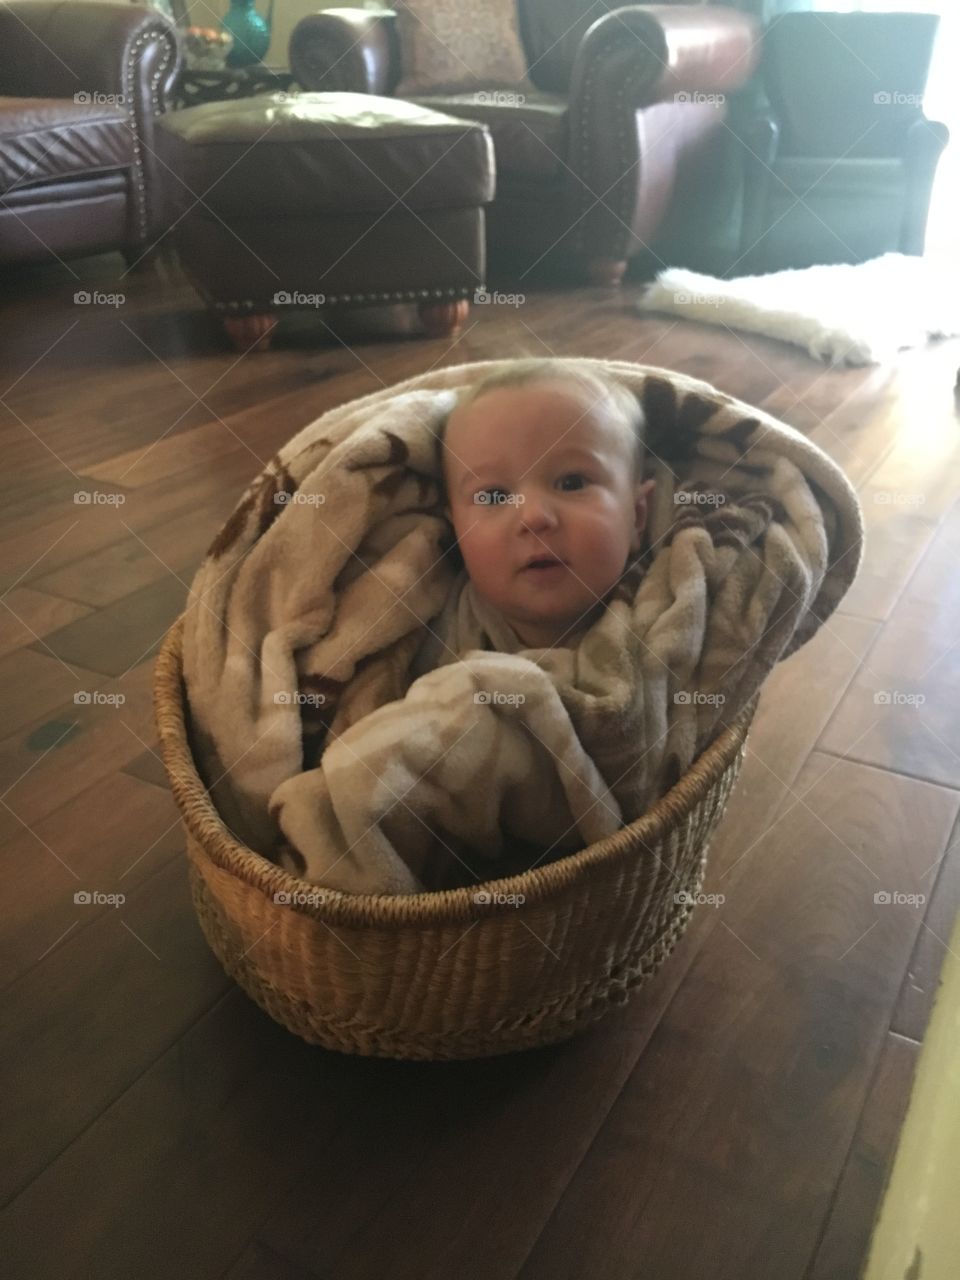 Baby boy in a basket with a brown blanket